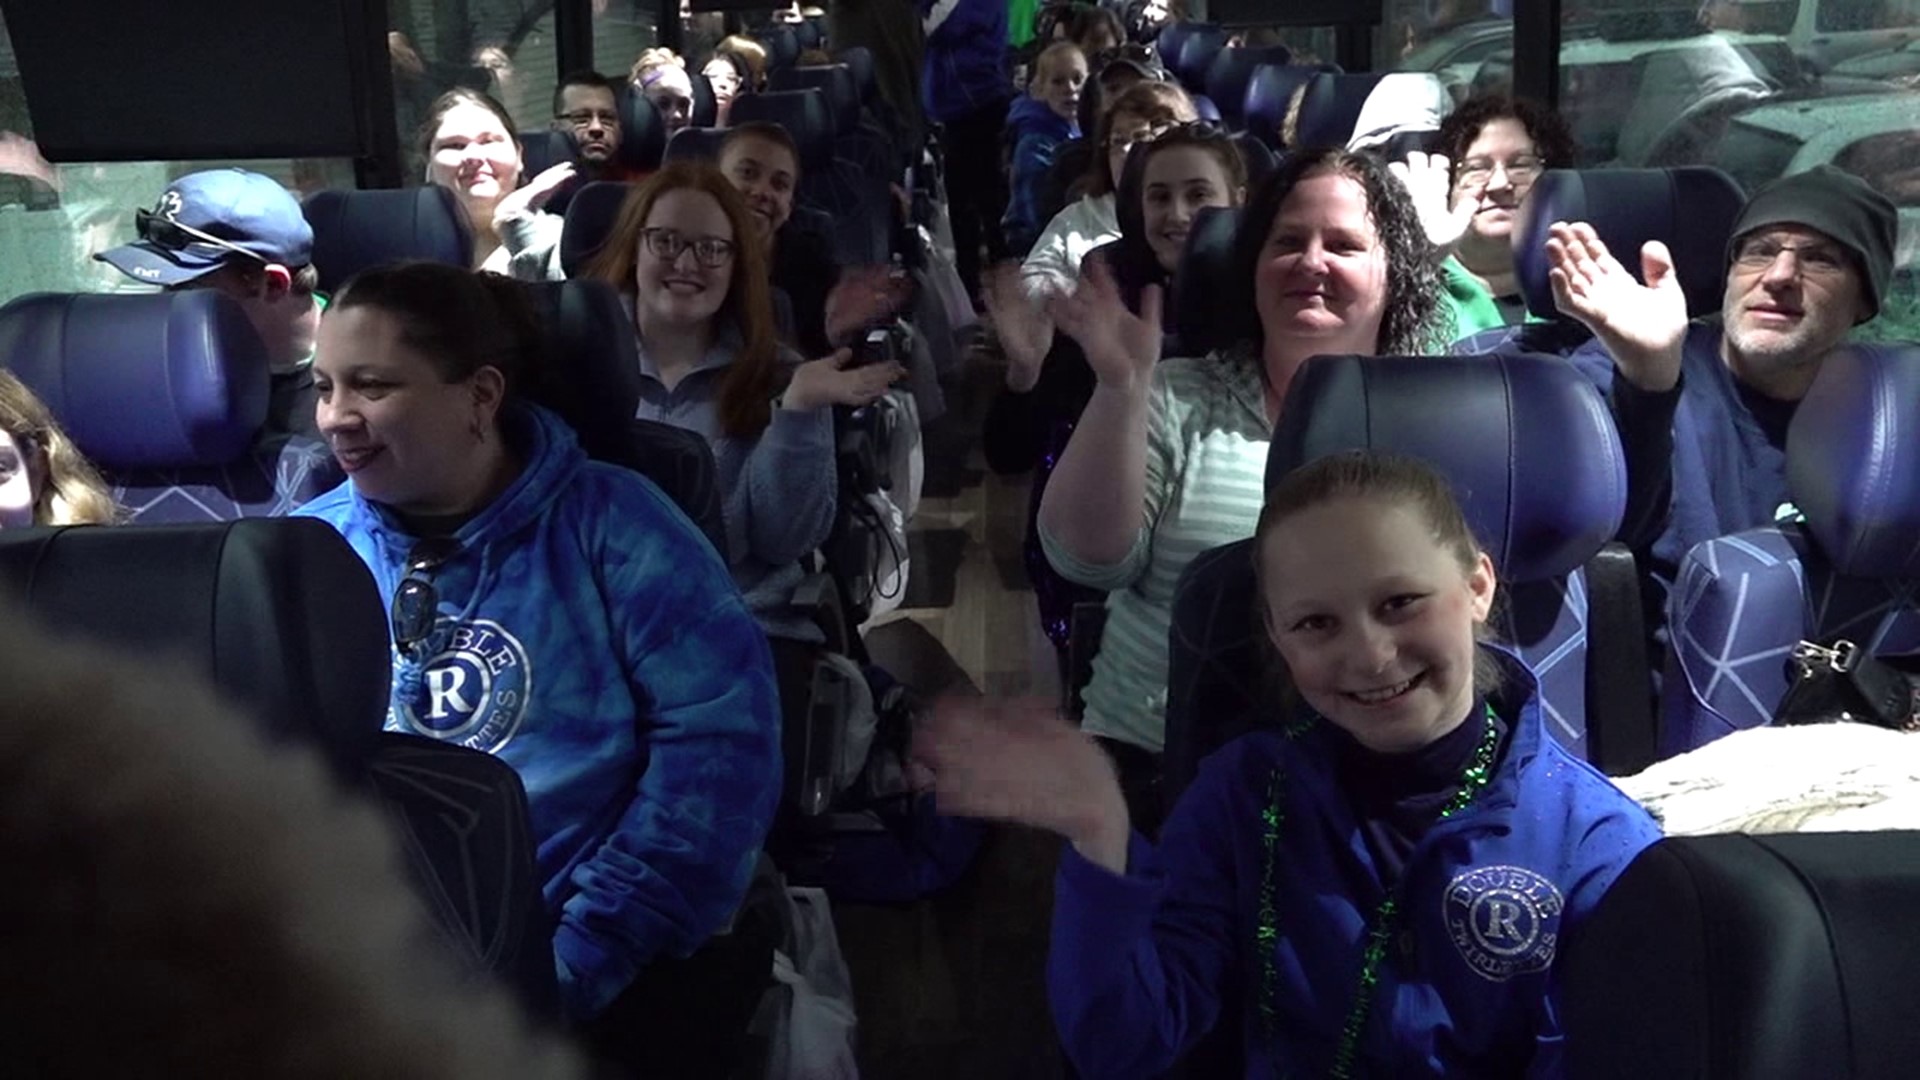 The Double "R" Twirlettes left Blakely for New York City Friday morning, where they will perform their way through the country's largest St. Patrick's Day parade.